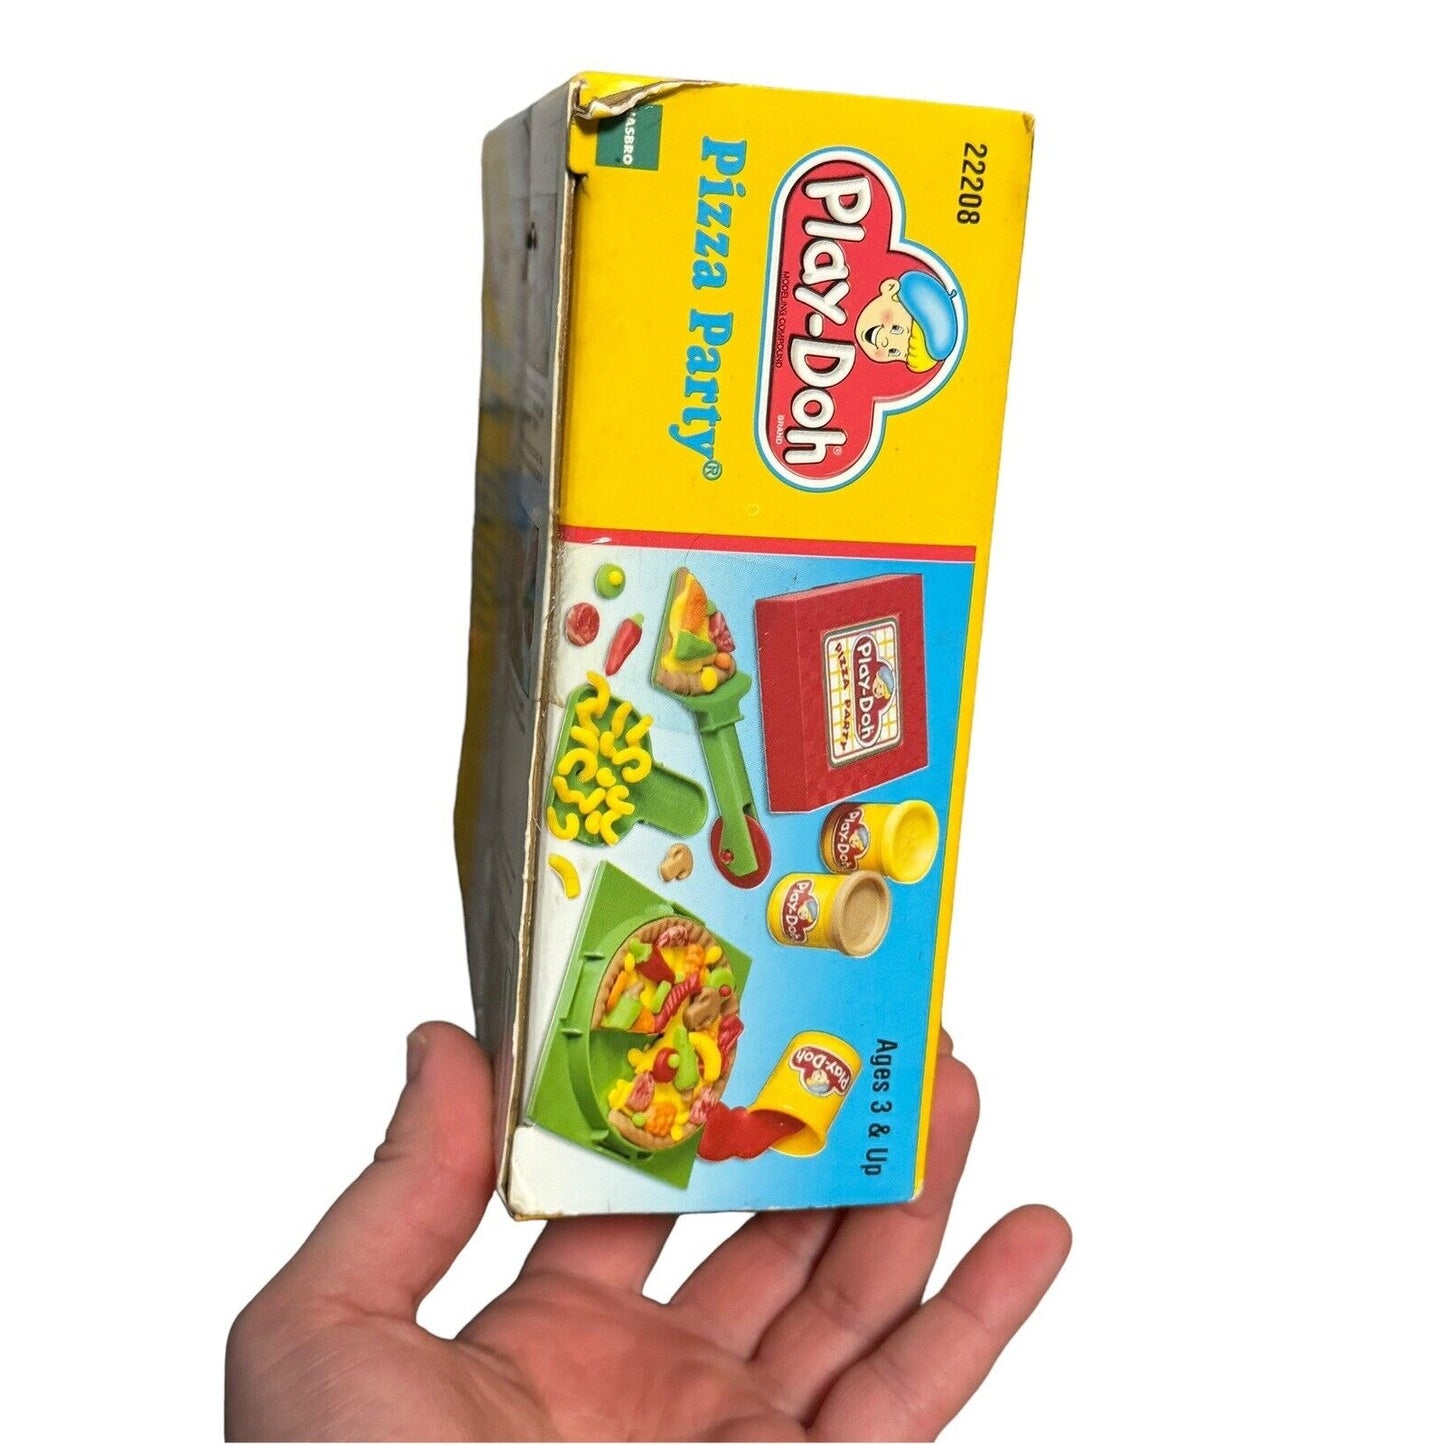 Vintage Brand New Play Doh Pizza Party Toy Set 1997 Hasbro